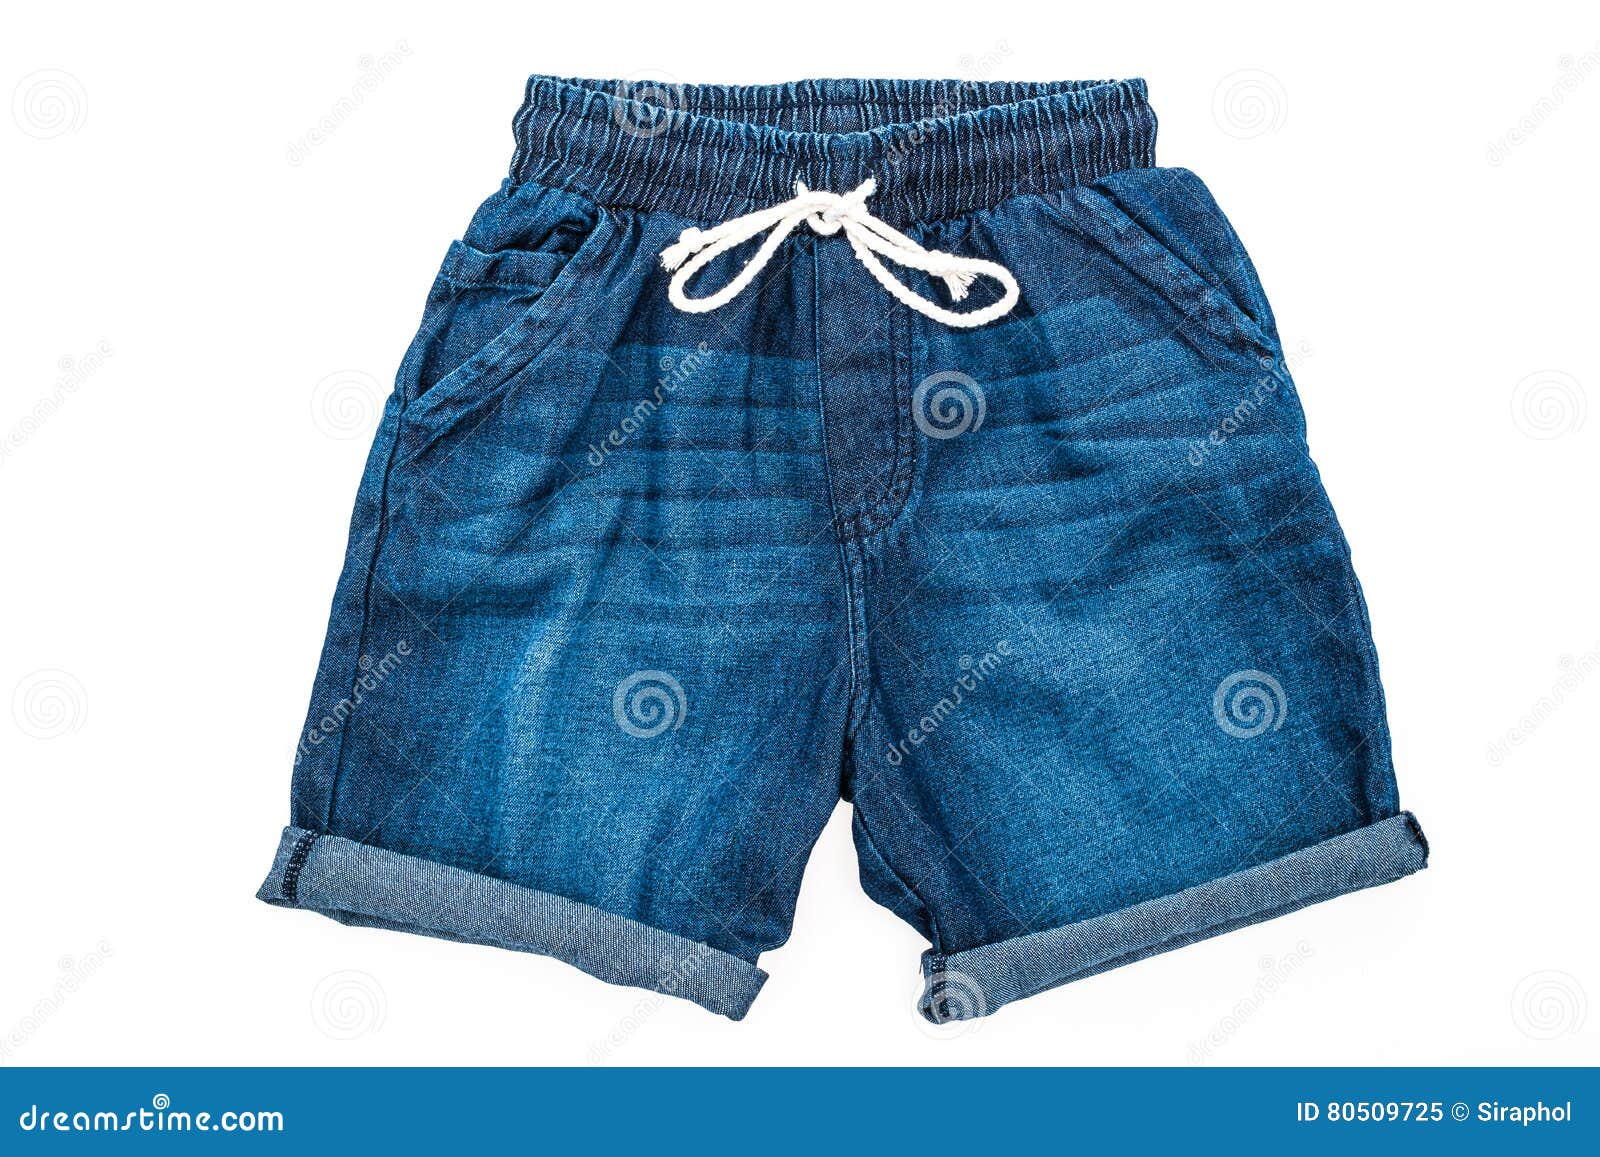 Short pants and clothes stock image. Image of workout - 80509725